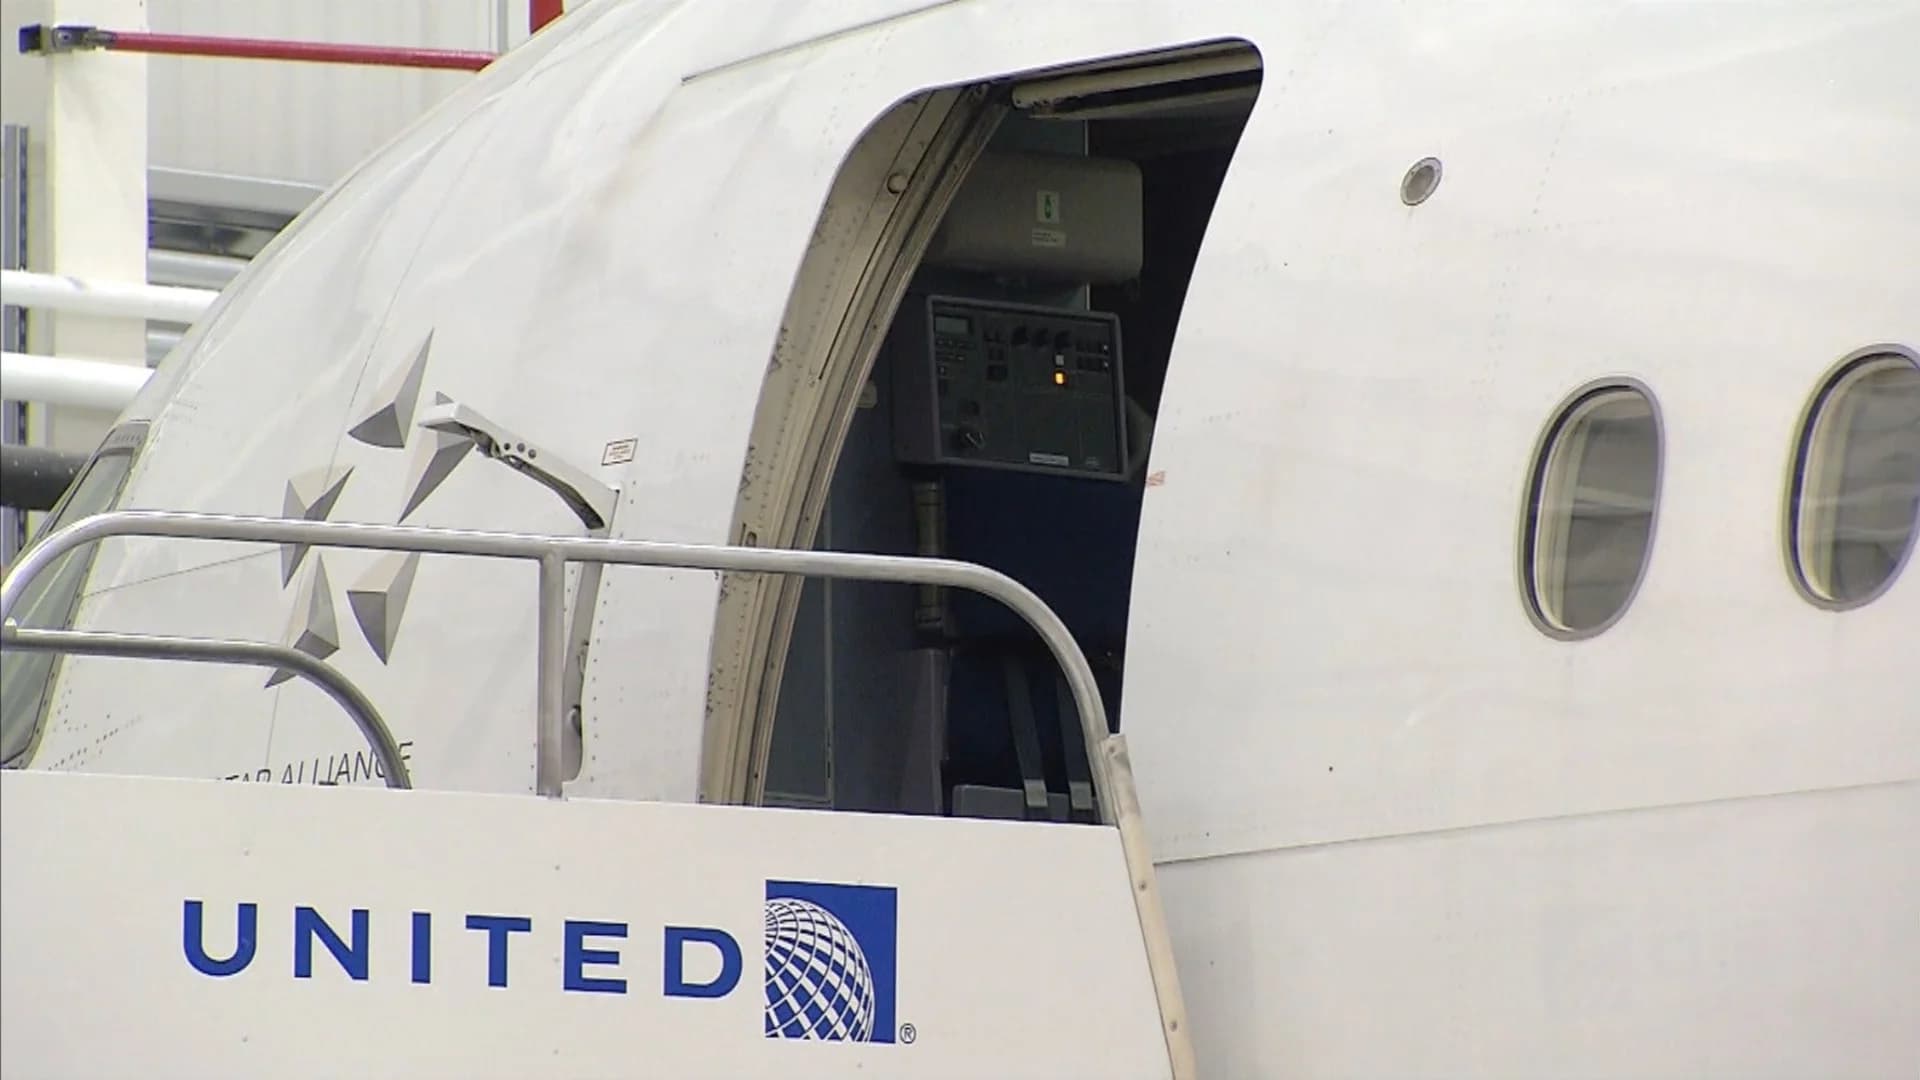 United apologizes after giving away toddler's purchased seat